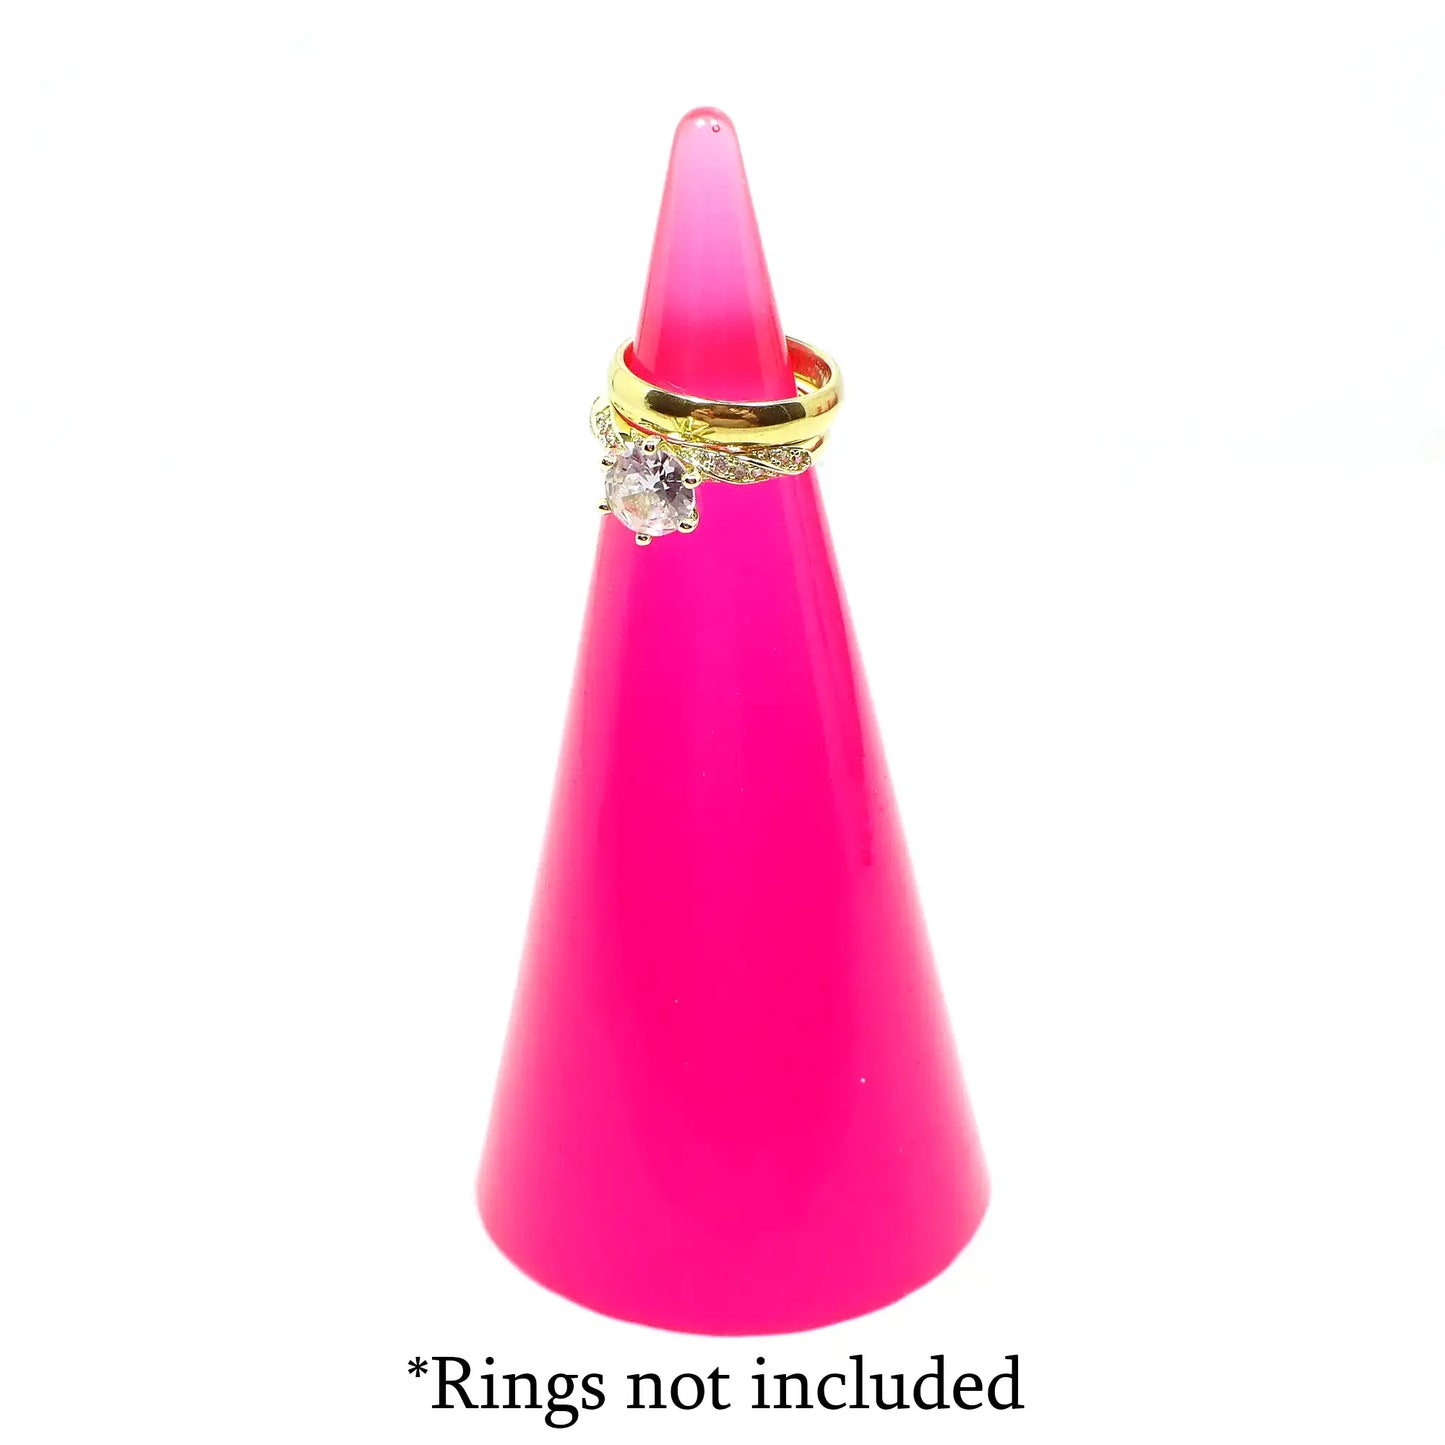 Photo showing the ring holder with rings sitting around the top. There is wording at the bottom that says "Rings not included."